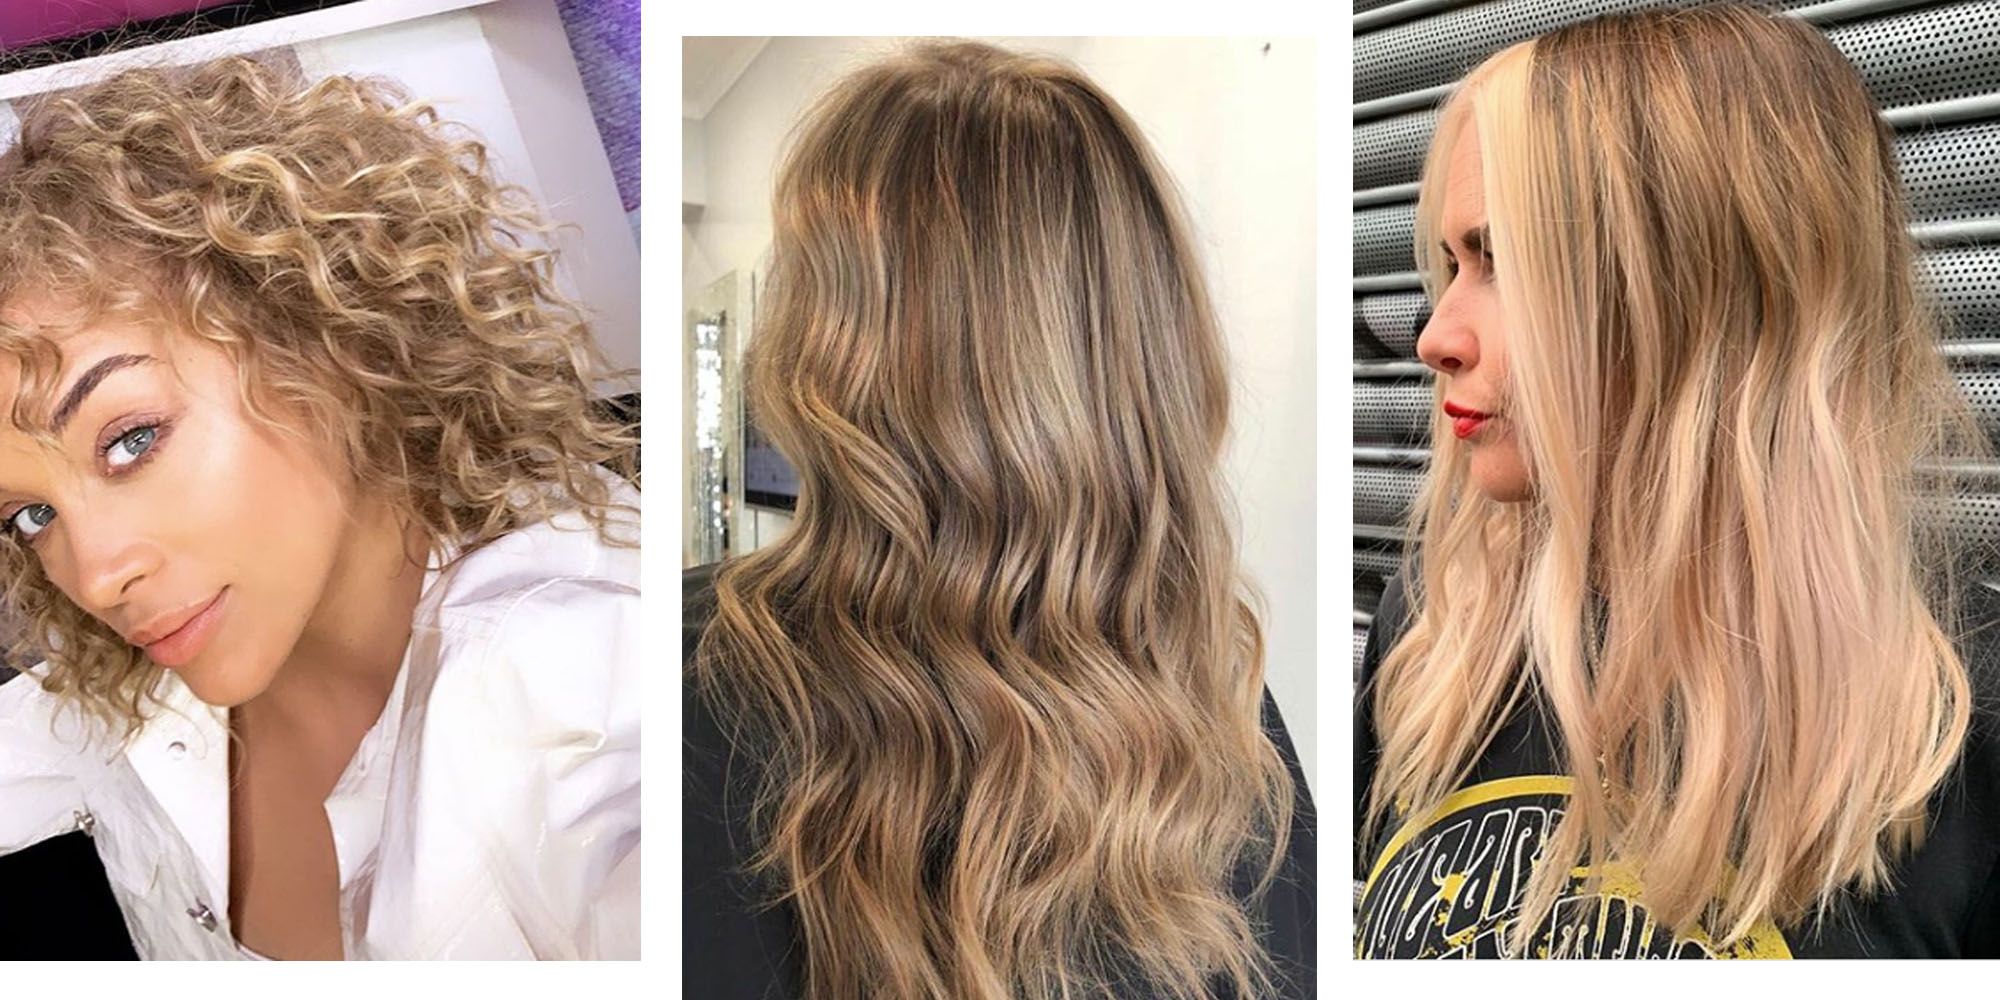 Everything You Need To Know About One Of 2022s Trendiest Hair Colors  Expensive Blond